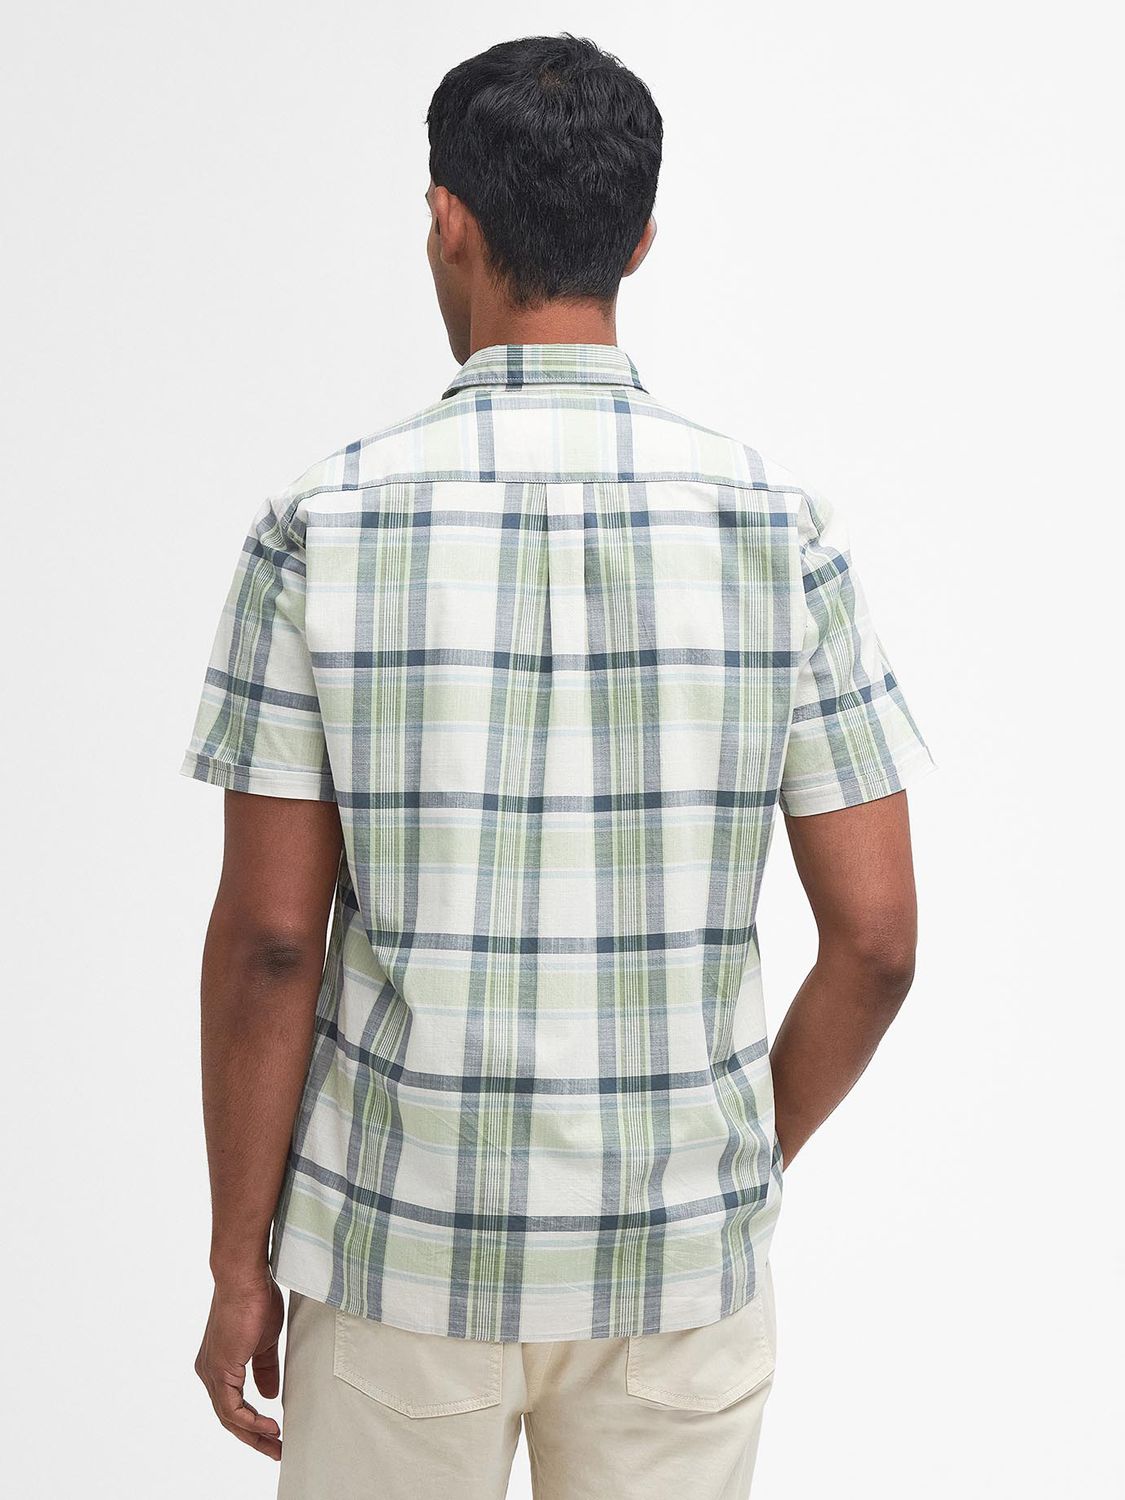 Buy Barbour Rosewell Short Sleeve Check Shirt, Green/Multi Online at johnlewis.com